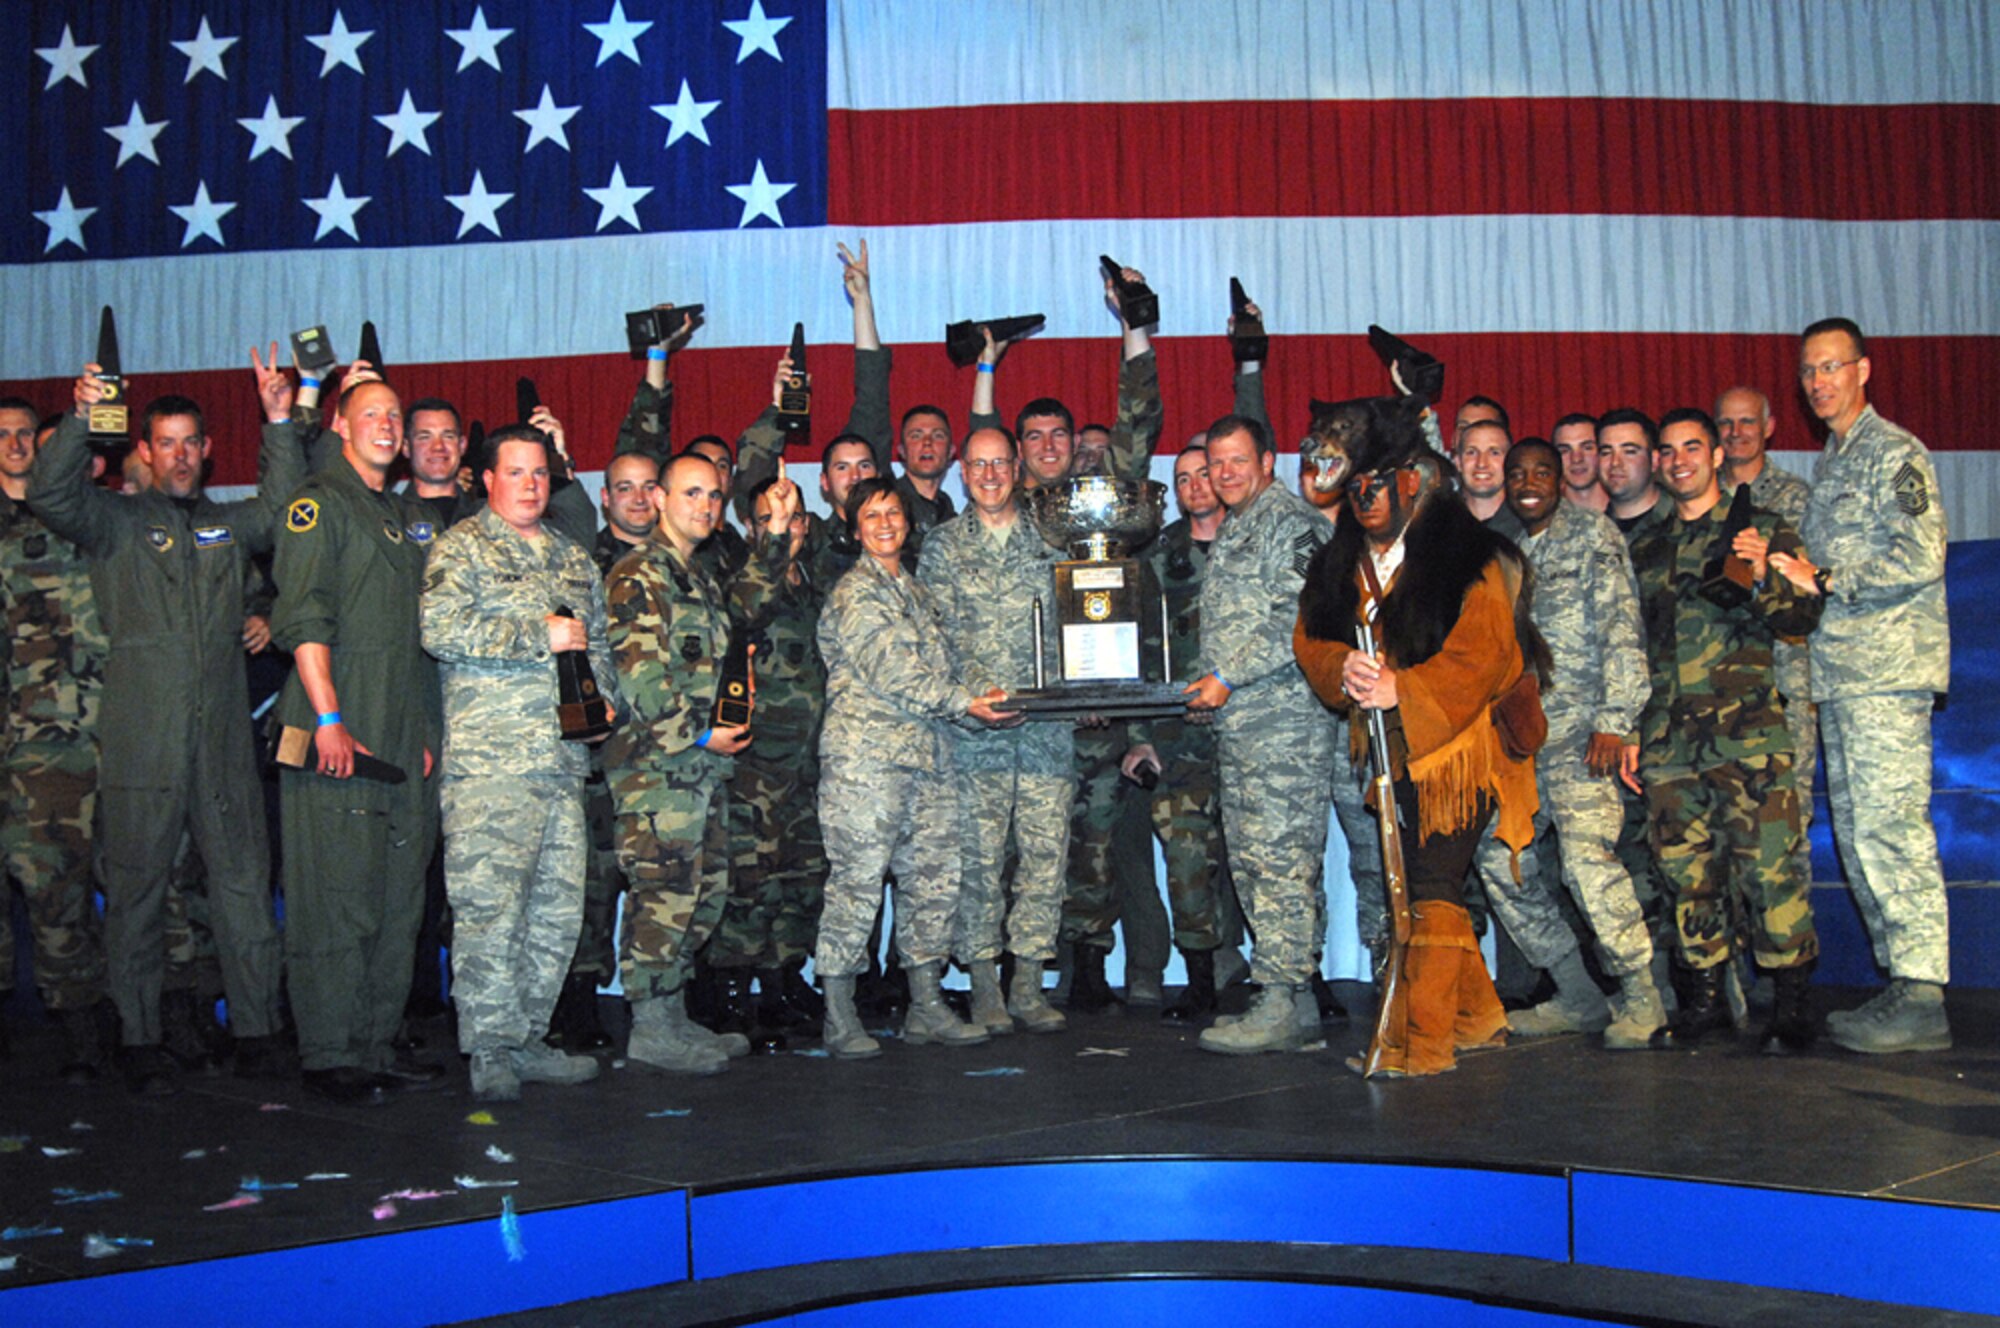 PETERSON AIR FORCE BASE, Colo. -- Members of the 341st Space Wing Wing, Malmstrom AFB, Mont., Guardian Challenge team celebrate their Blanchard Trophy win here May 9 naming them the Best ICBM Space Wing in Air Force Space Command. (U.S. Air Force photo by Duncan Wood)